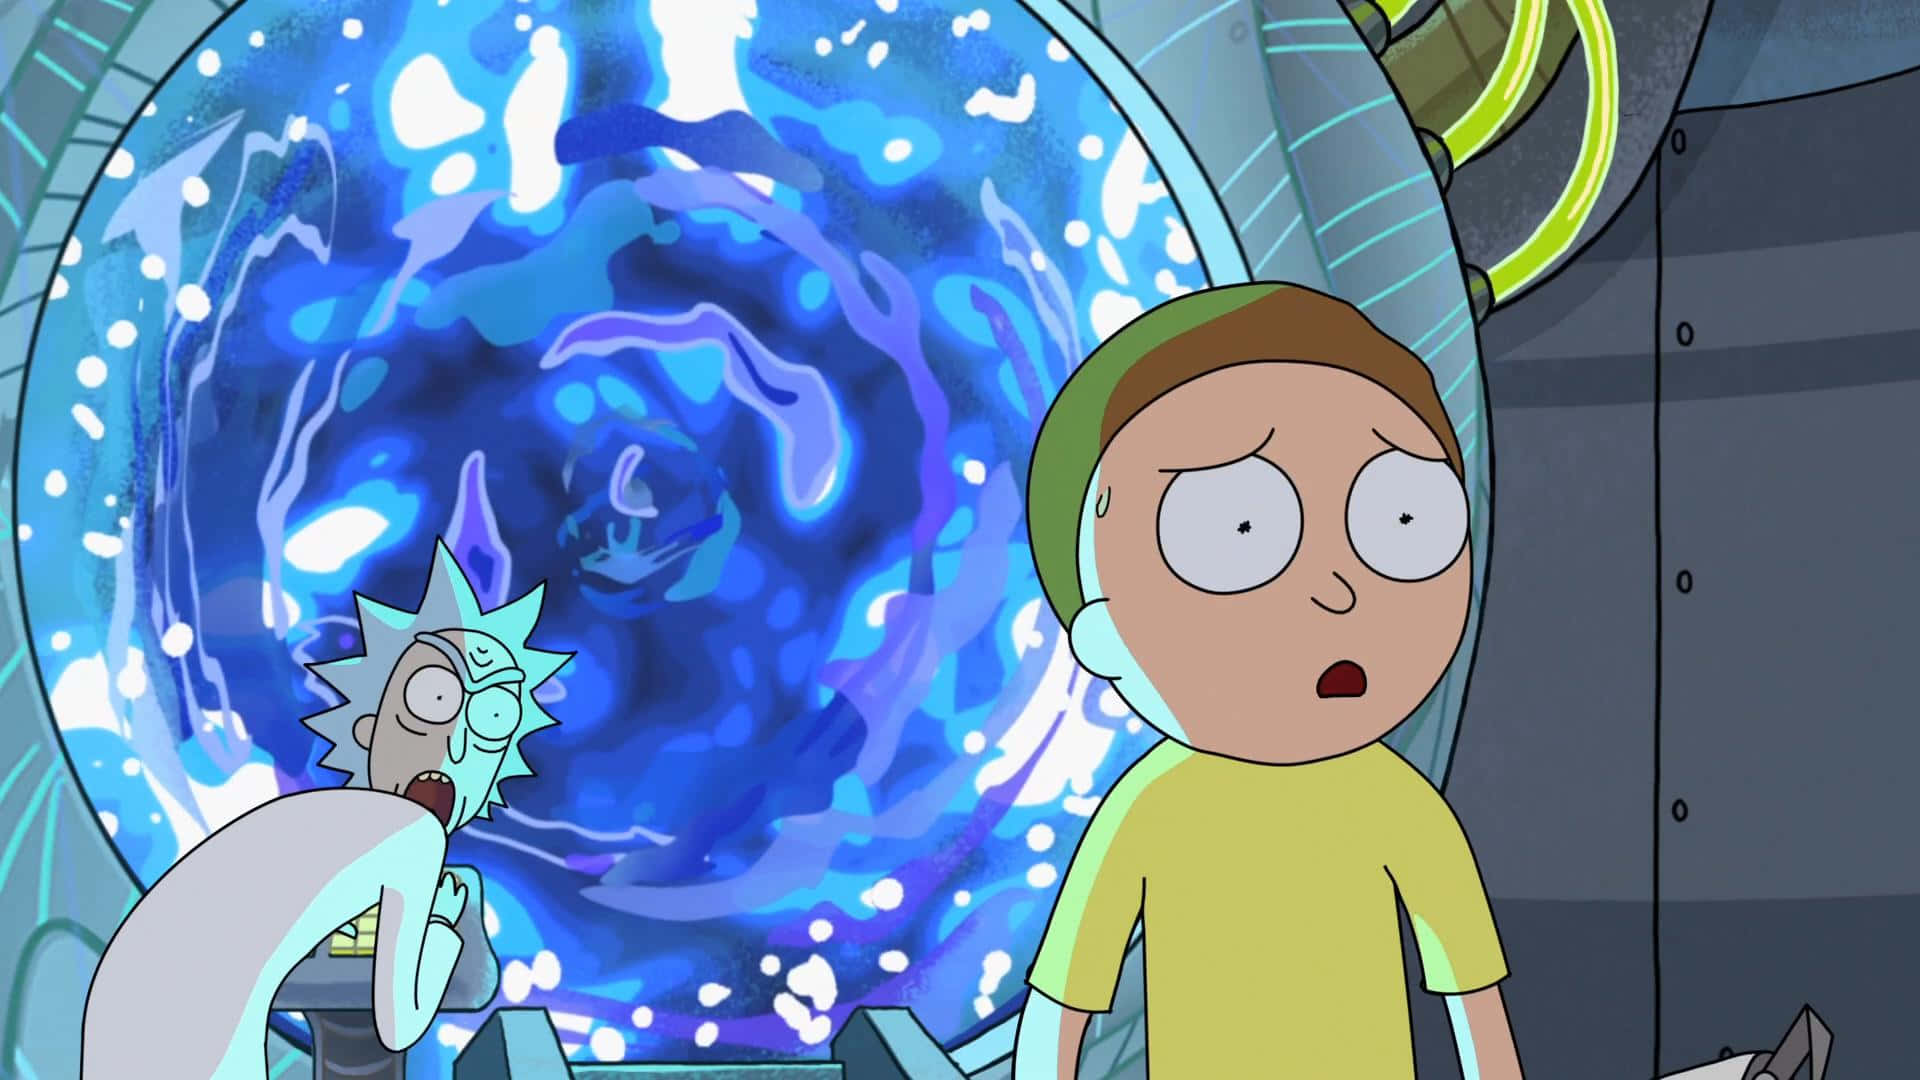 “Morty Smith Showing His Determination in Pursuit of a Great Adventure.” Wallpaper